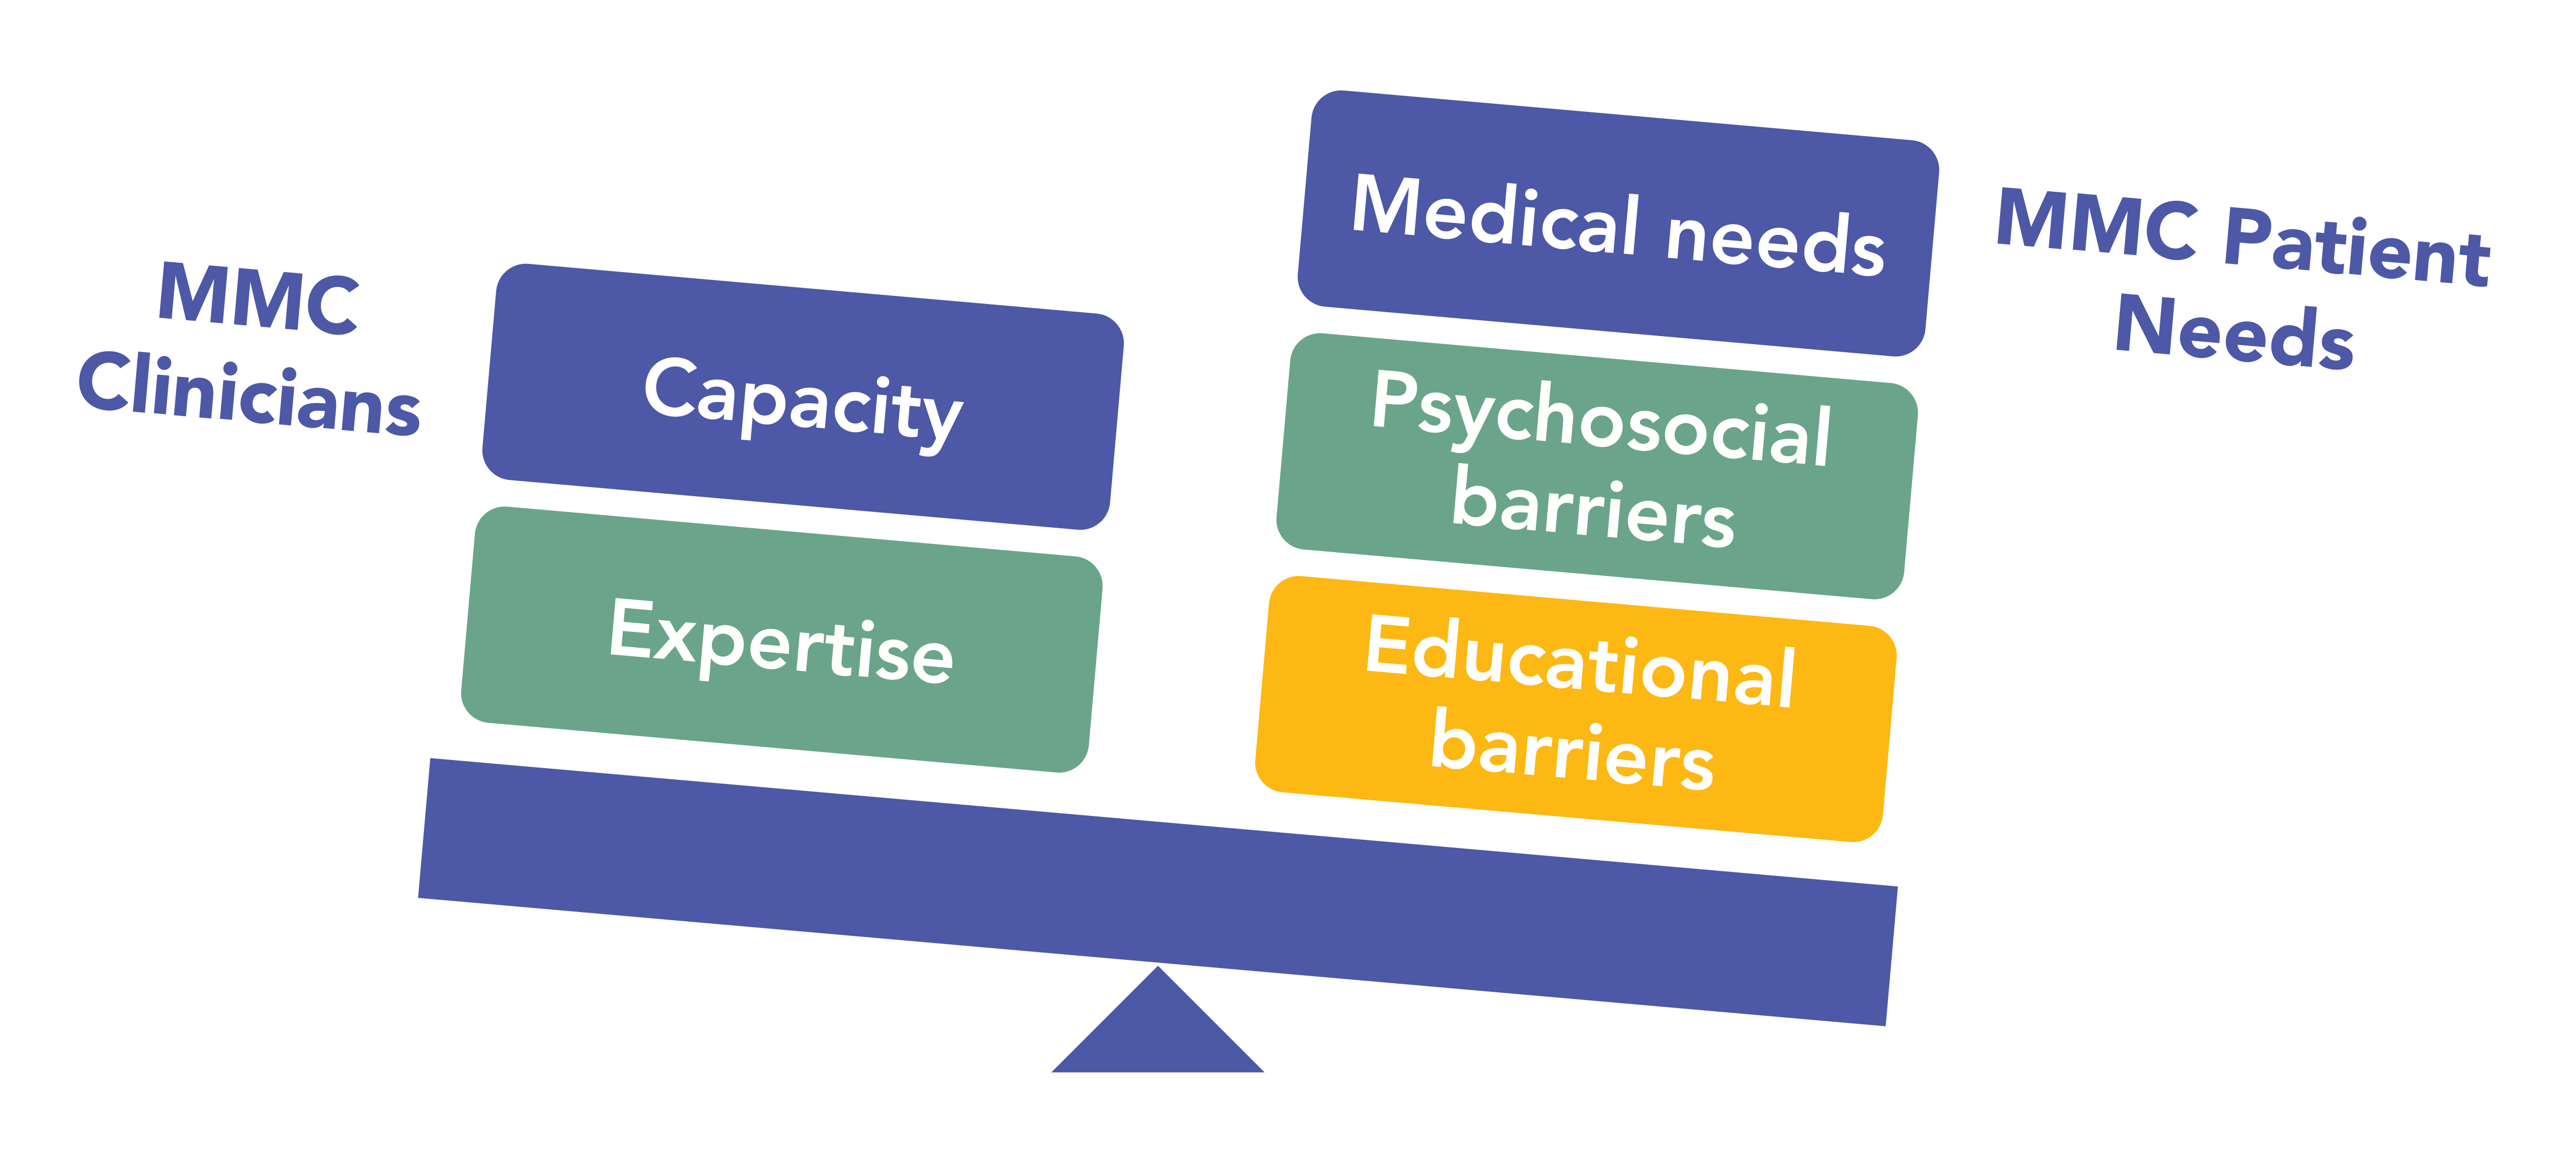  A blue, green and orange graphic depicting a scale showing MMC Clinicians and MMC Patient Needs. The scale is tilted towards patient needs.